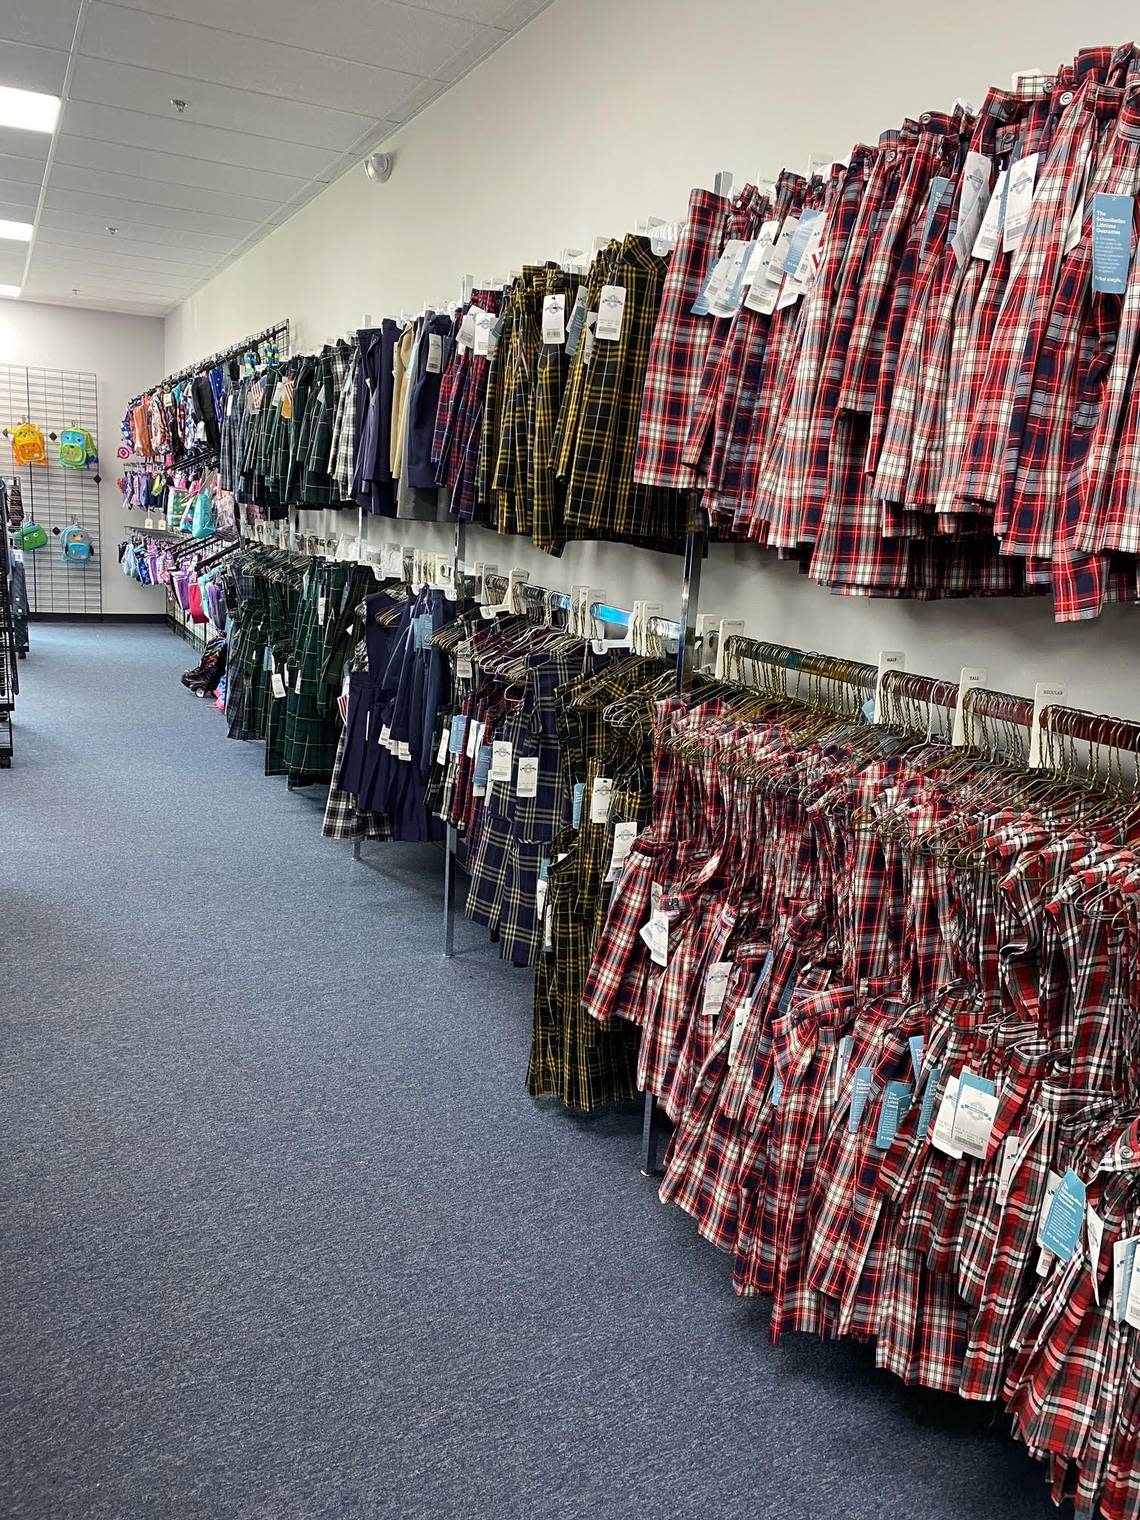 Bruce Carroll, who owns Cleveland-based Schoolbelles, moved his store to New Leaf earlier this summer for a couple of reasons.